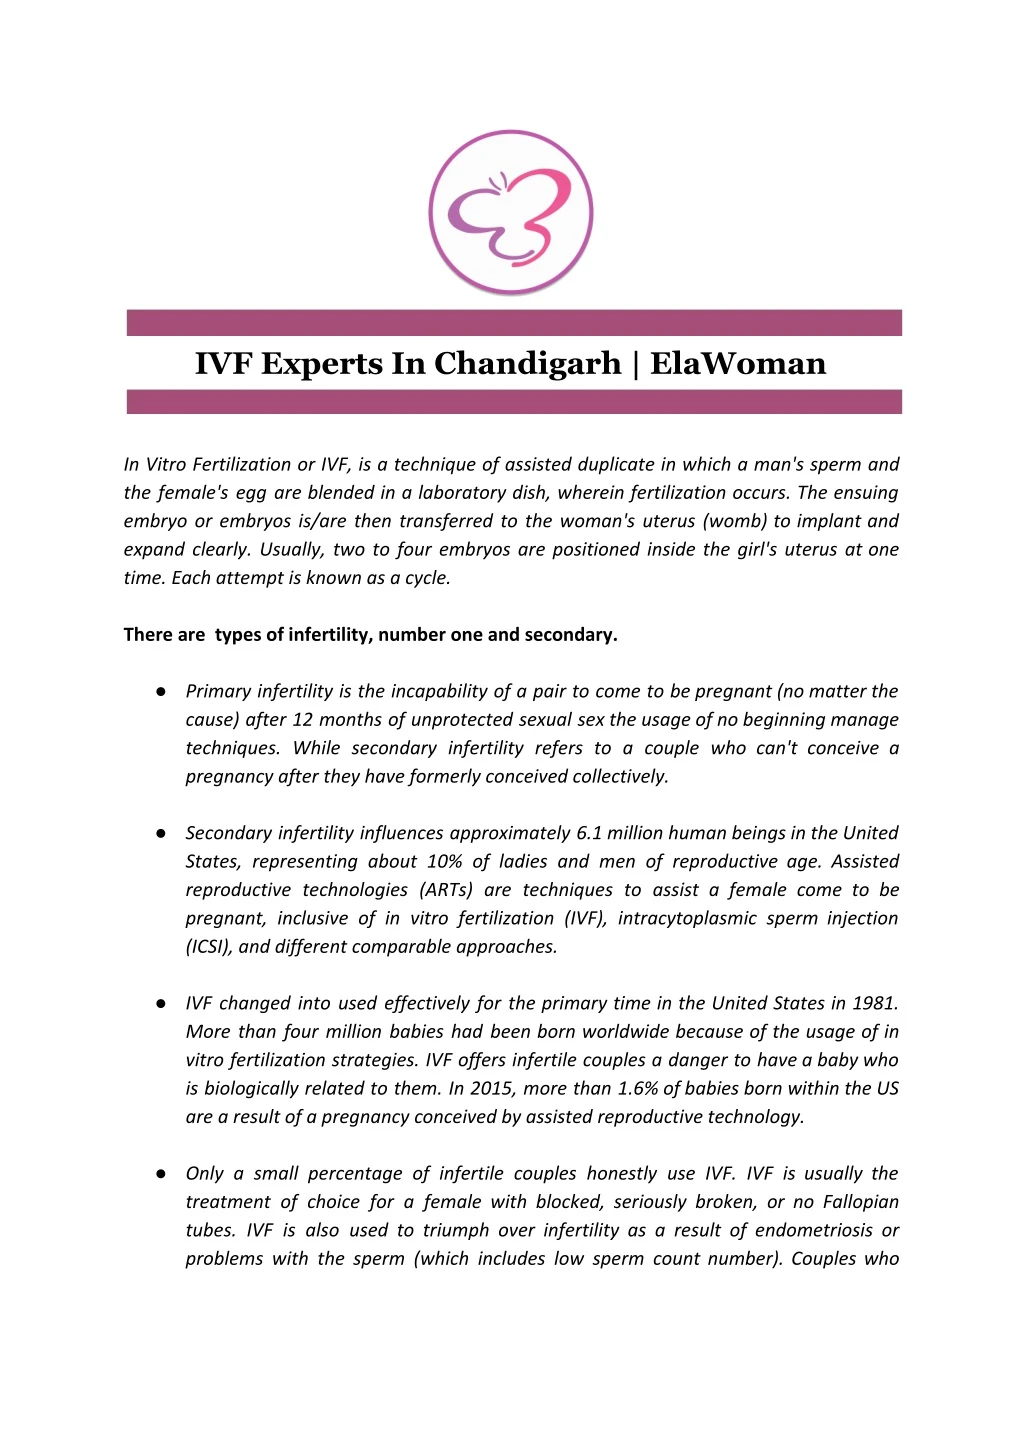 ivf experts in chandigarh elawoman